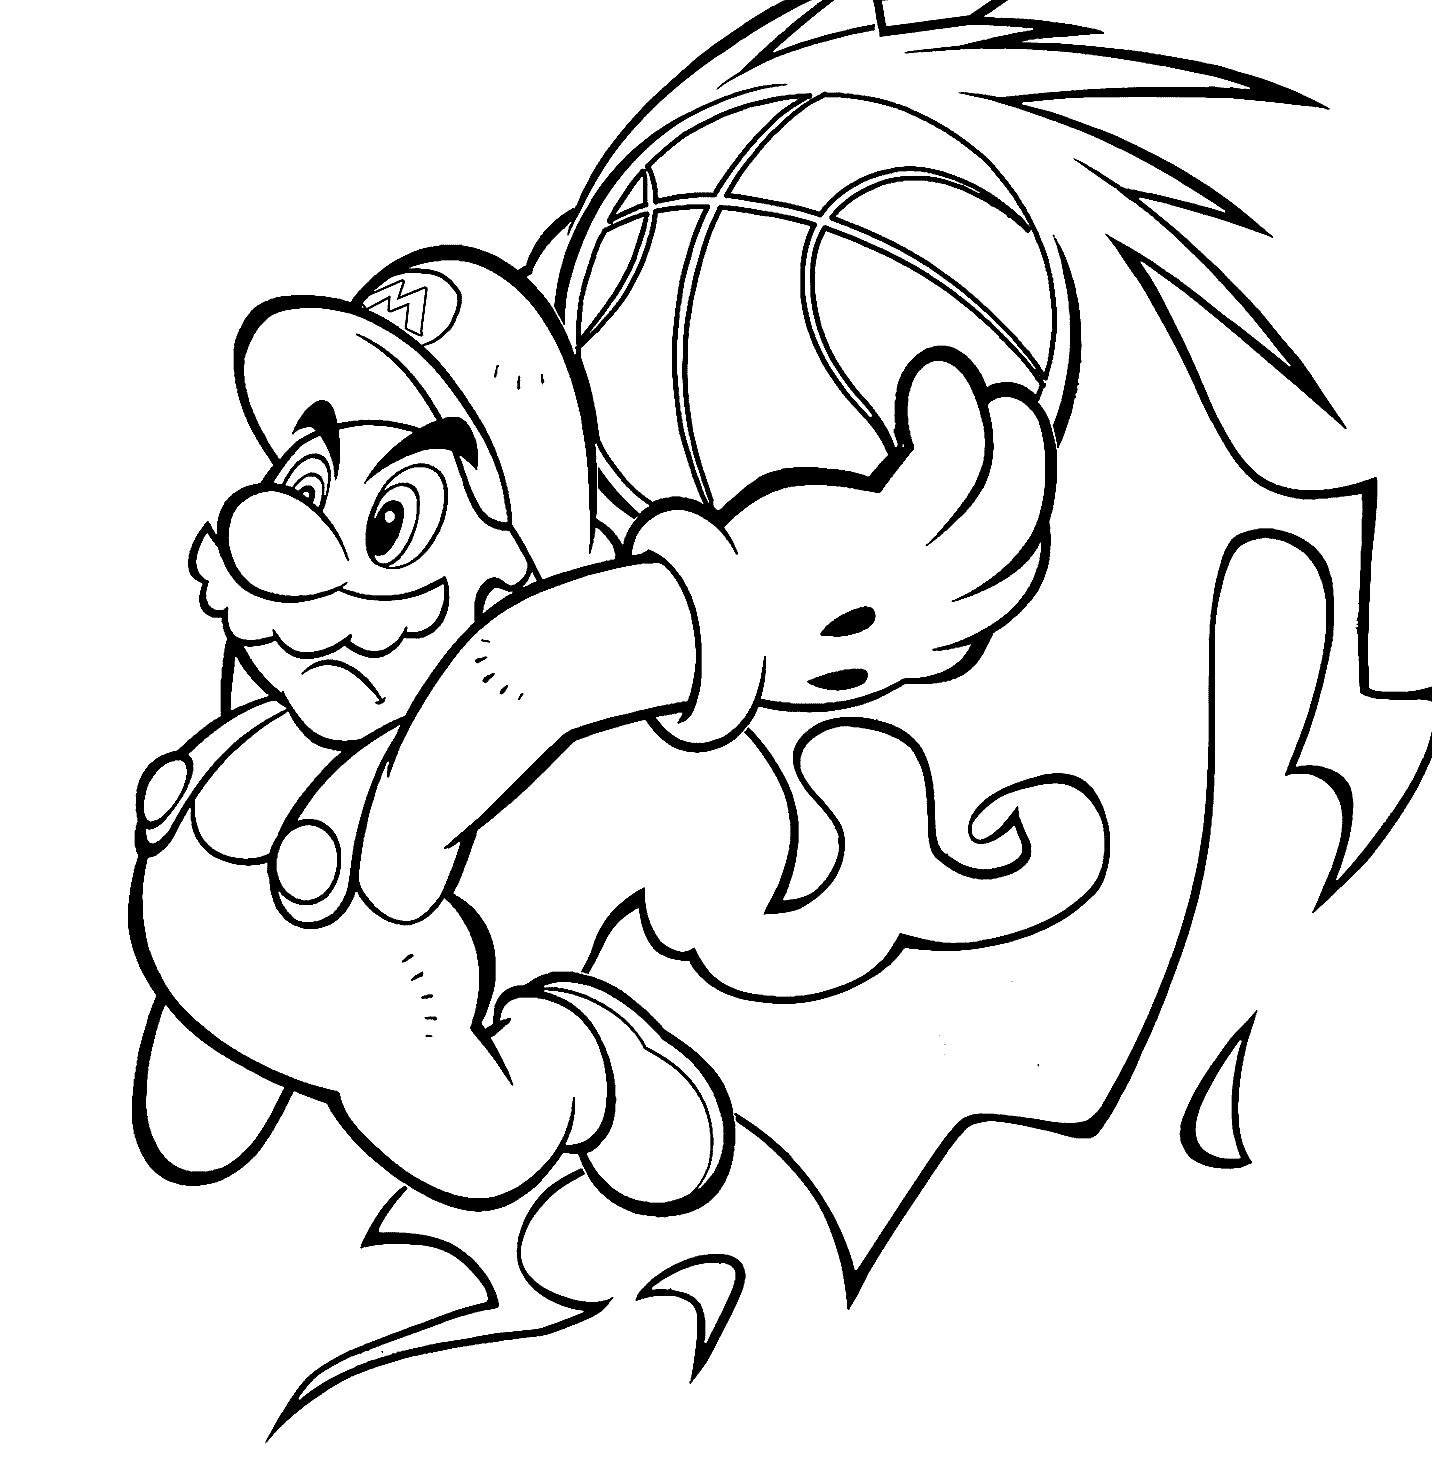 Super Smash Bros Characters Coloring Pages Coloring Pages